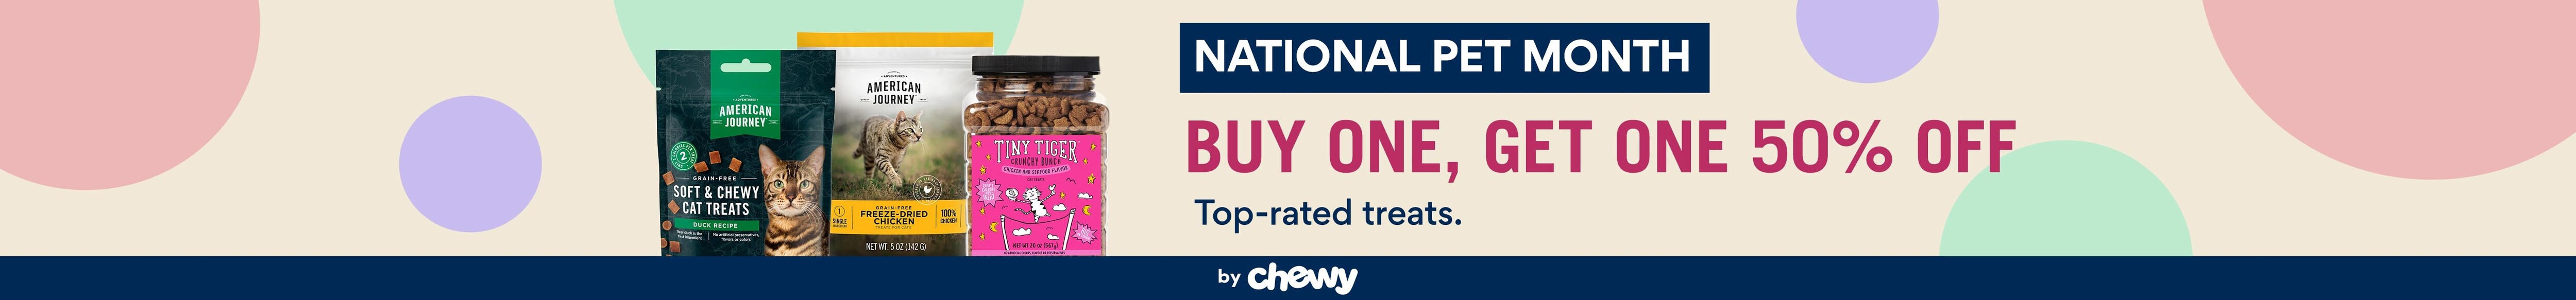 National Pet Month Reward your #1 Celebrate with savings on treats from top-rated brands. by Chewy